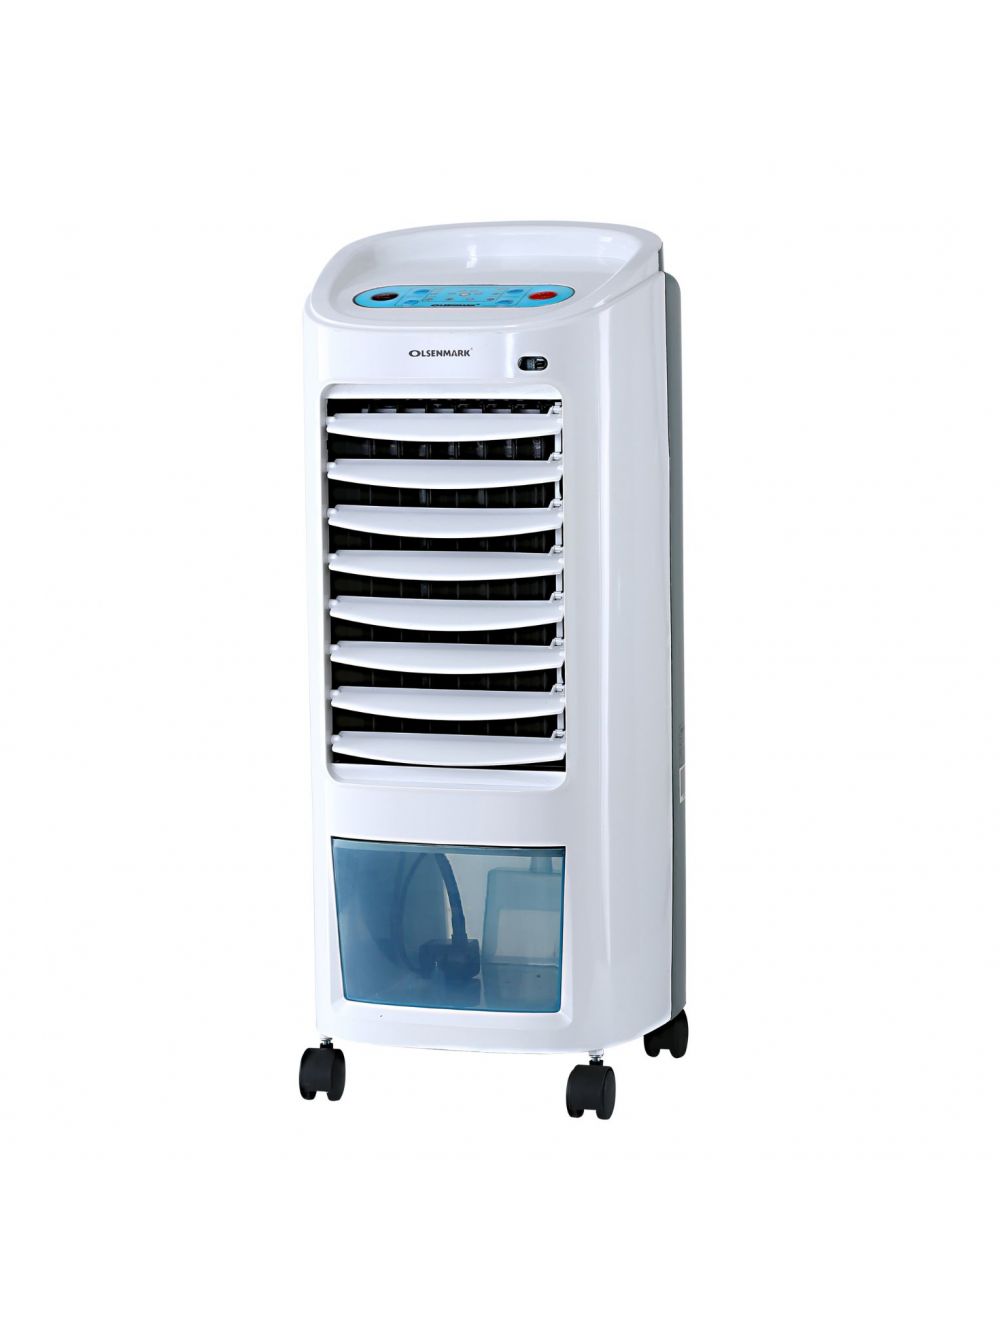 Olsenmark Air Cooler, 7L Water Tank - Remote Control - 3 Speed Settings - Left - Right Swing - Up-Down Wing